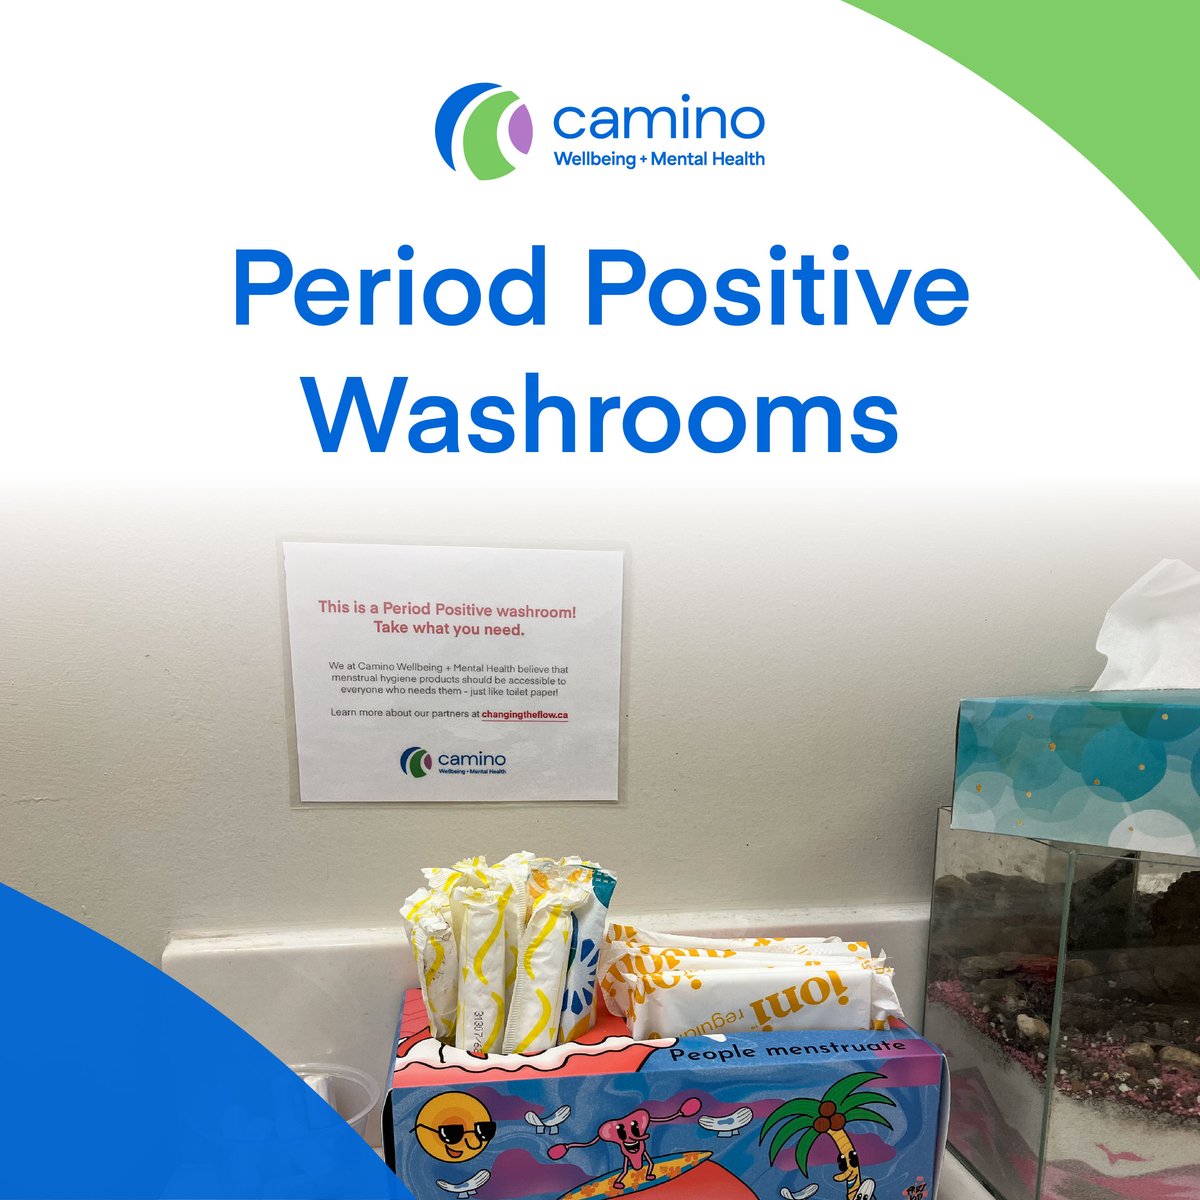 [Follow @CaminoWellbeing for new updates. This account will be inactive soon.] Period positive washrooms are a step towards menstrual equity, which is affordable and safe access to menstrual products when and where they are needed – and that can be in any washroom at any time.